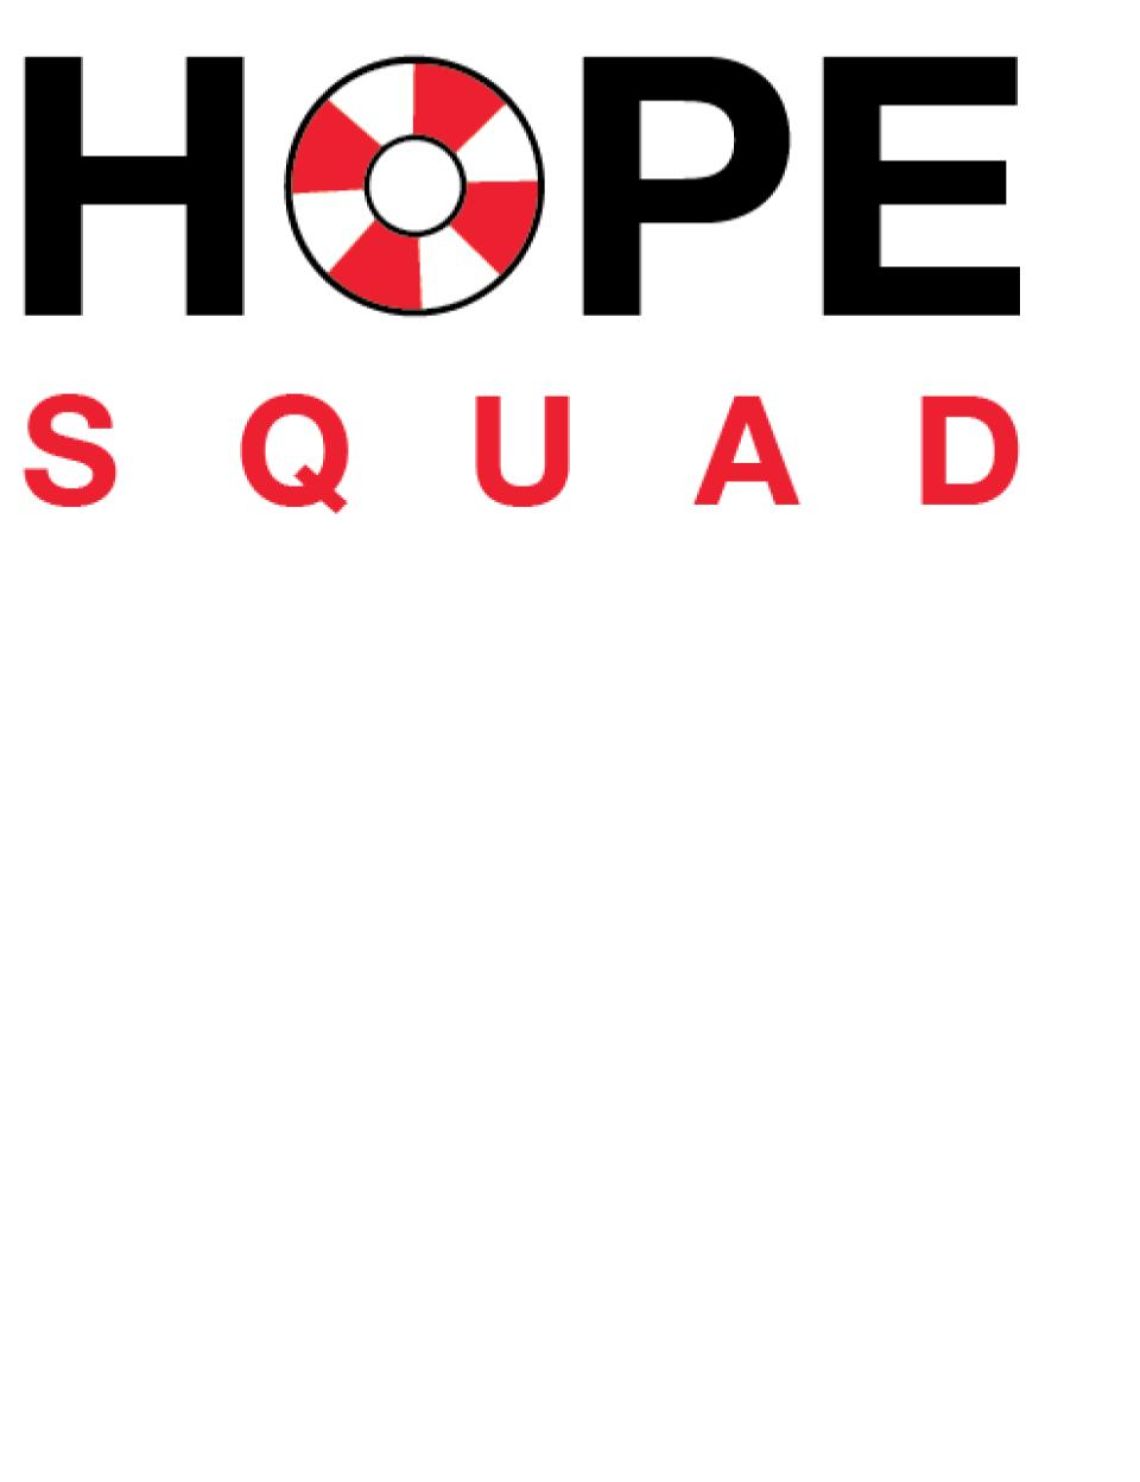 Hope Squad Logo with words Suicide Prevention Program